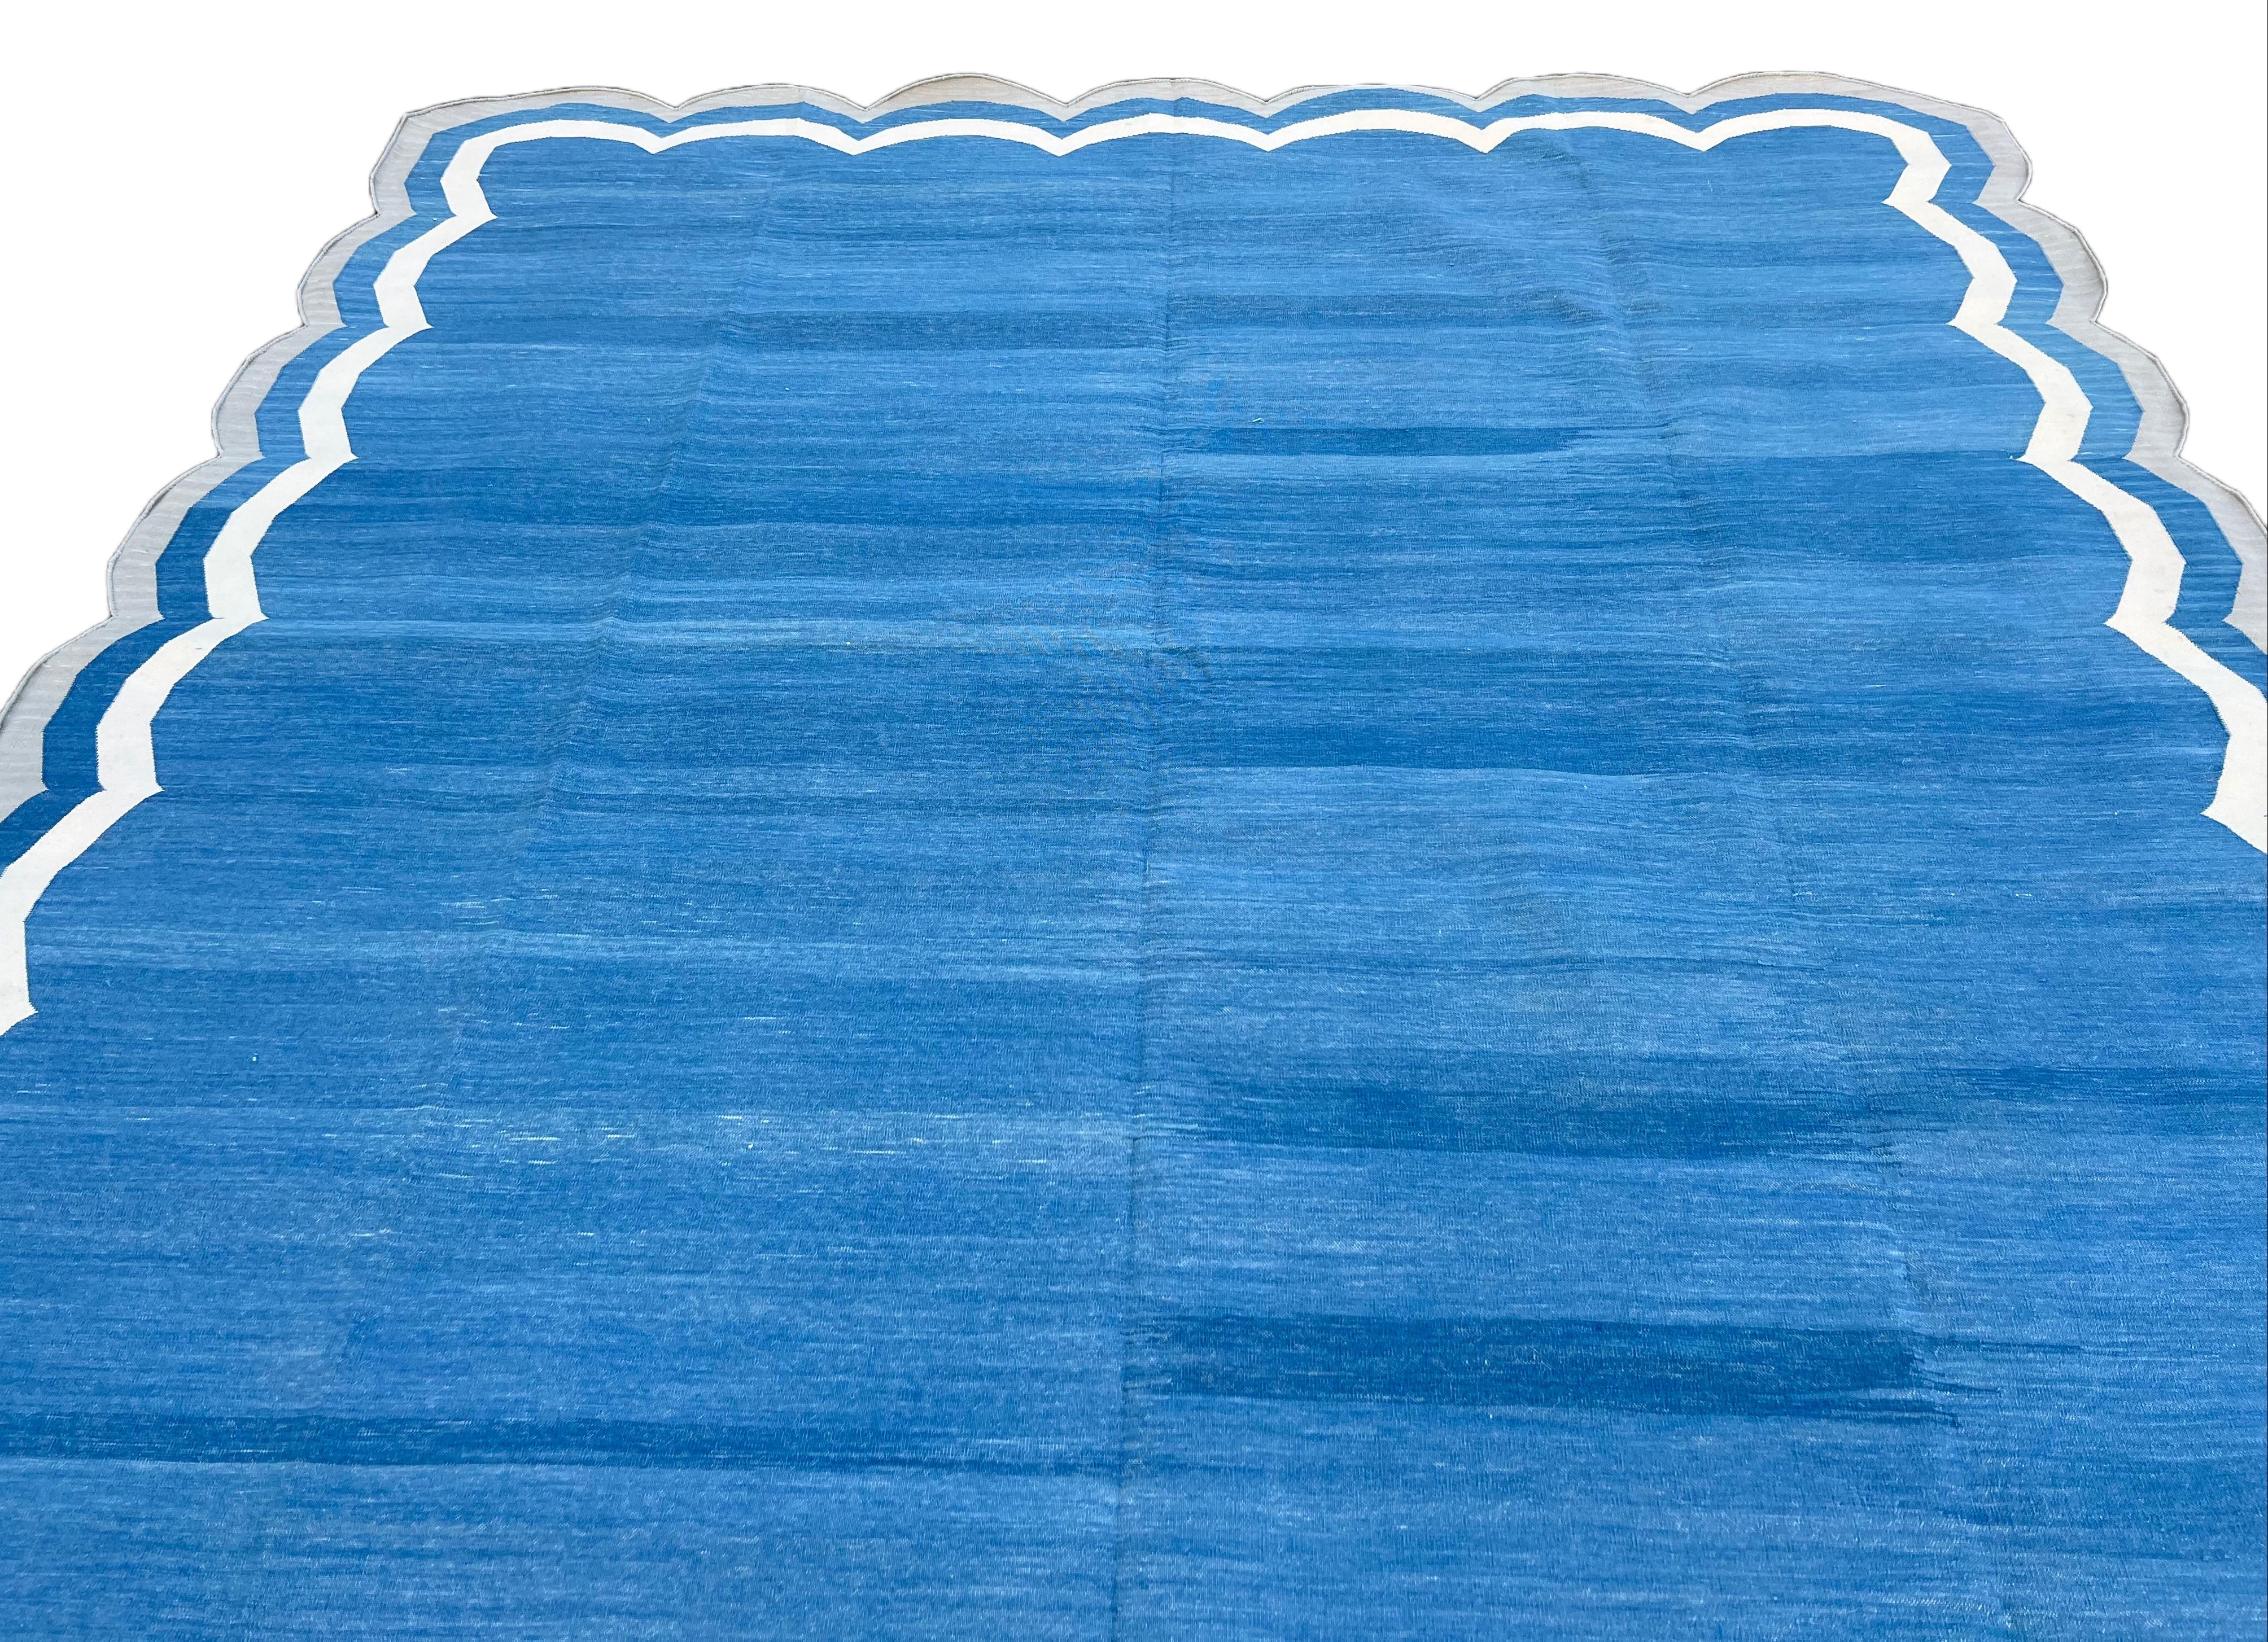 Handmade Cotton Area Flat Weave Rug, 8x10 Blue And Grey Scalloped Stripe Dhurrie In New Condition For Sale In Jaipur, IN